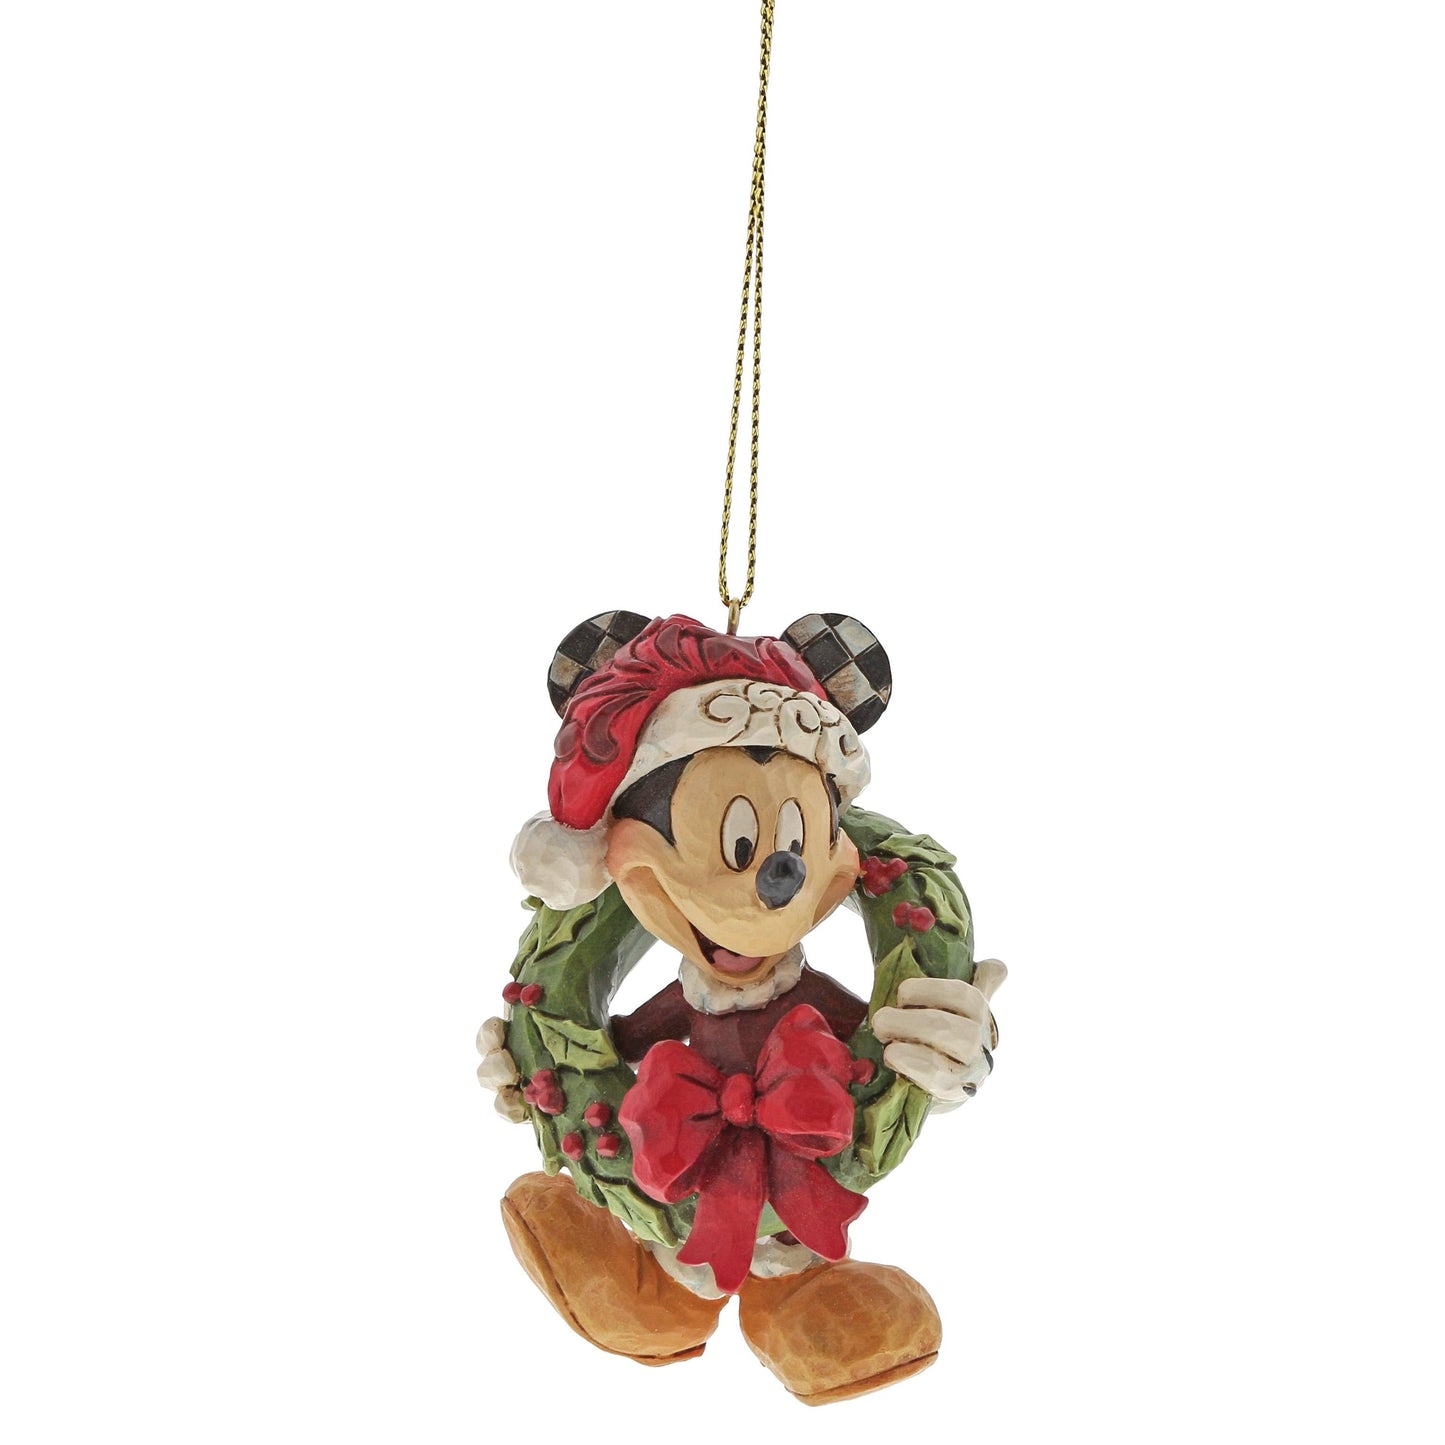 Mickey Mouse Hanging Ornament (Disney Traditions by Jim Shore) - Gallery Gifts Online 